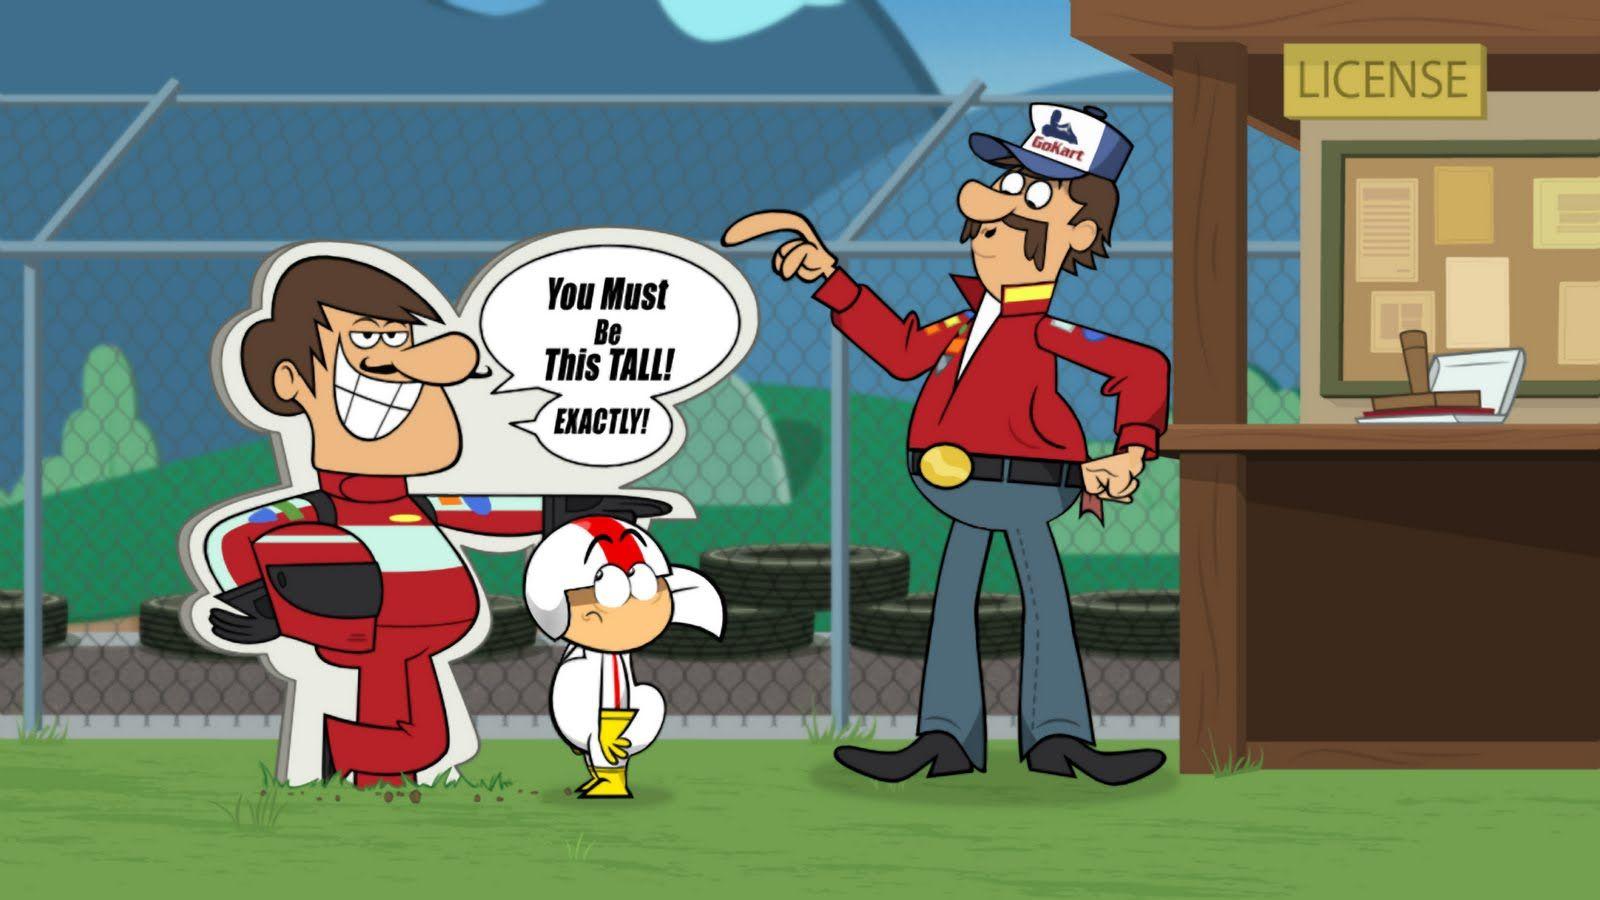 Carl Edwards Guest Stars In A New Episode of 'Kick Buttowski